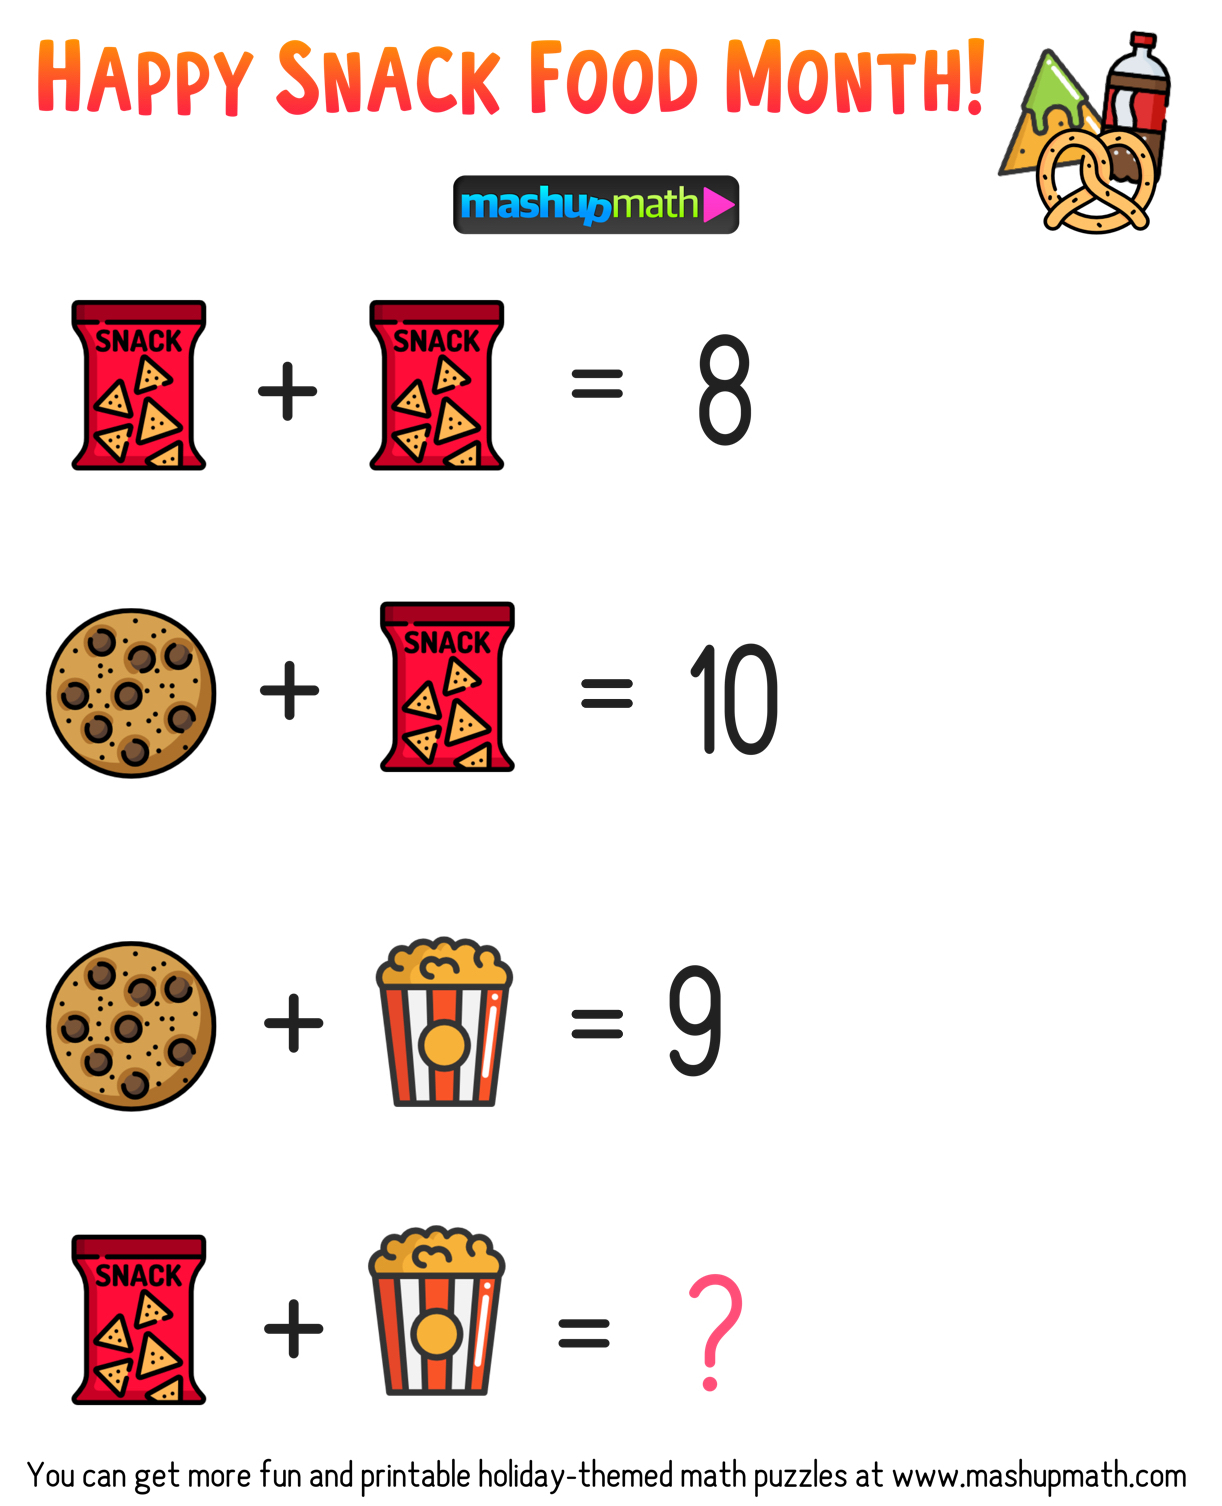 Free Math Brain Teaser Puzzles for Kids in Grades 1-6 to ...